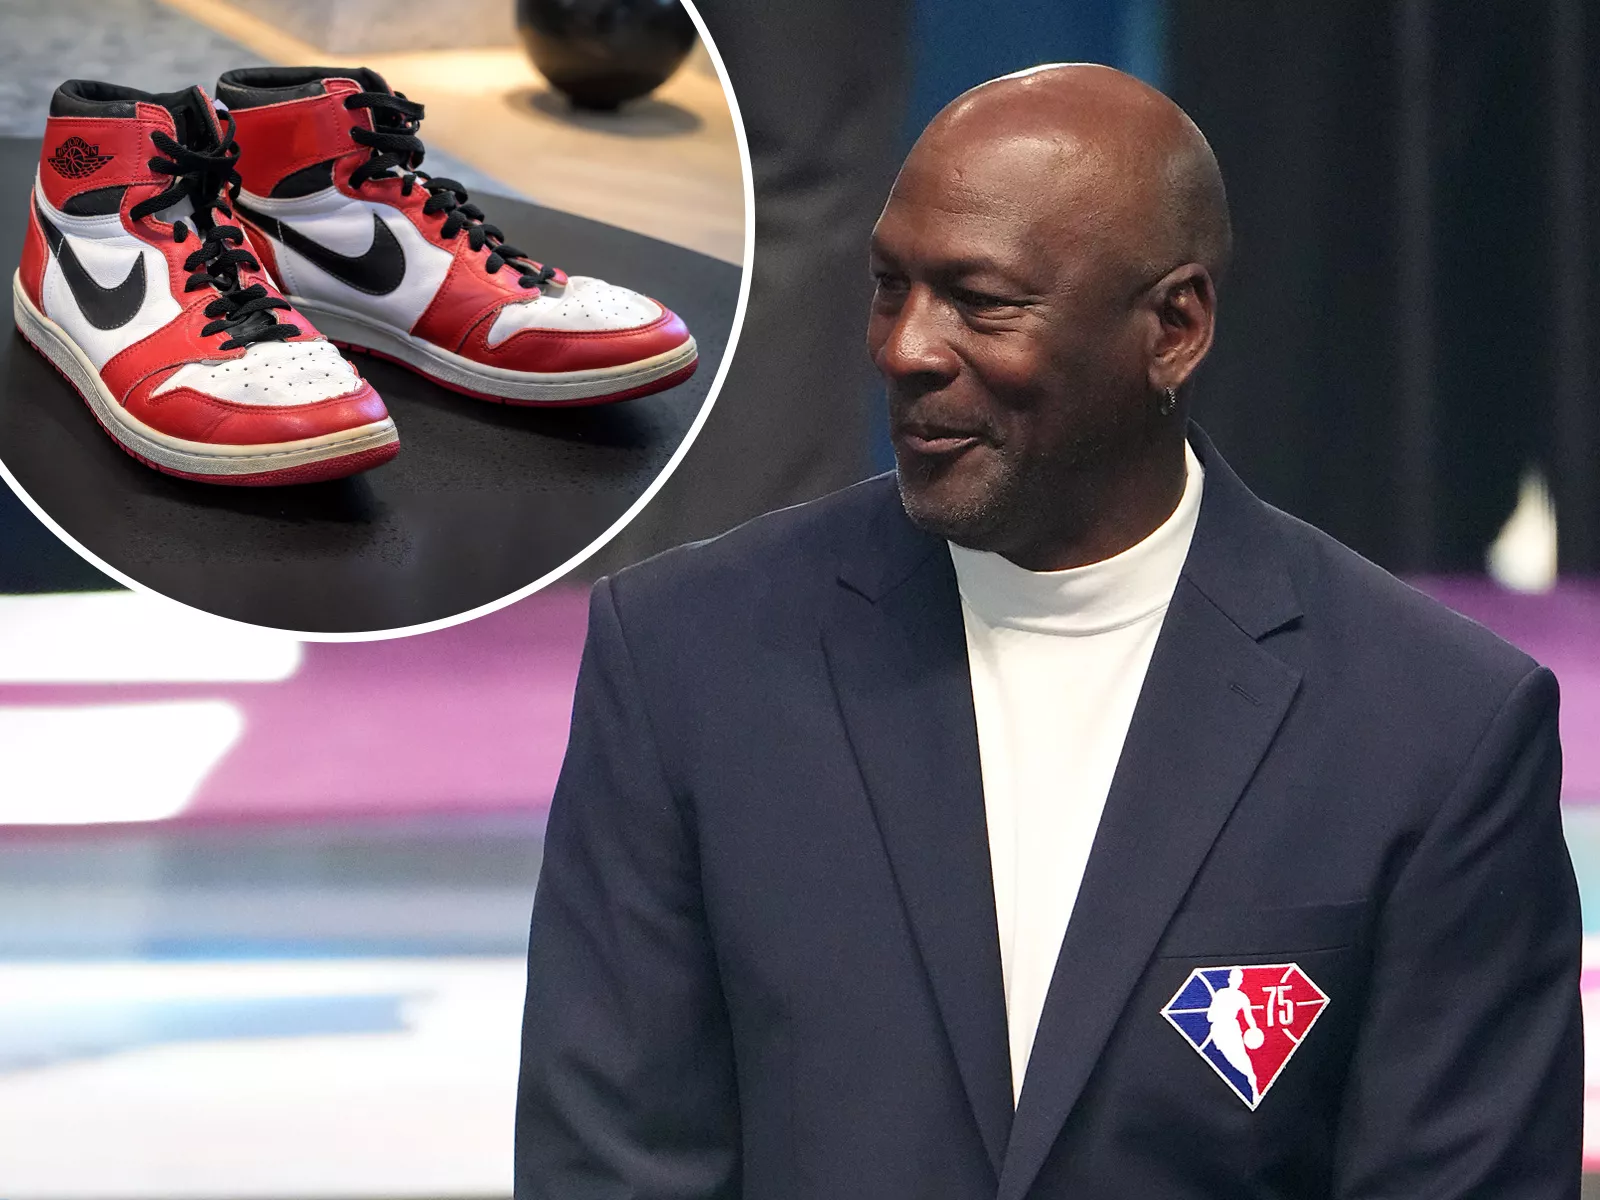 Why is Michael Jordan not in the movie 'Air'? Explaining